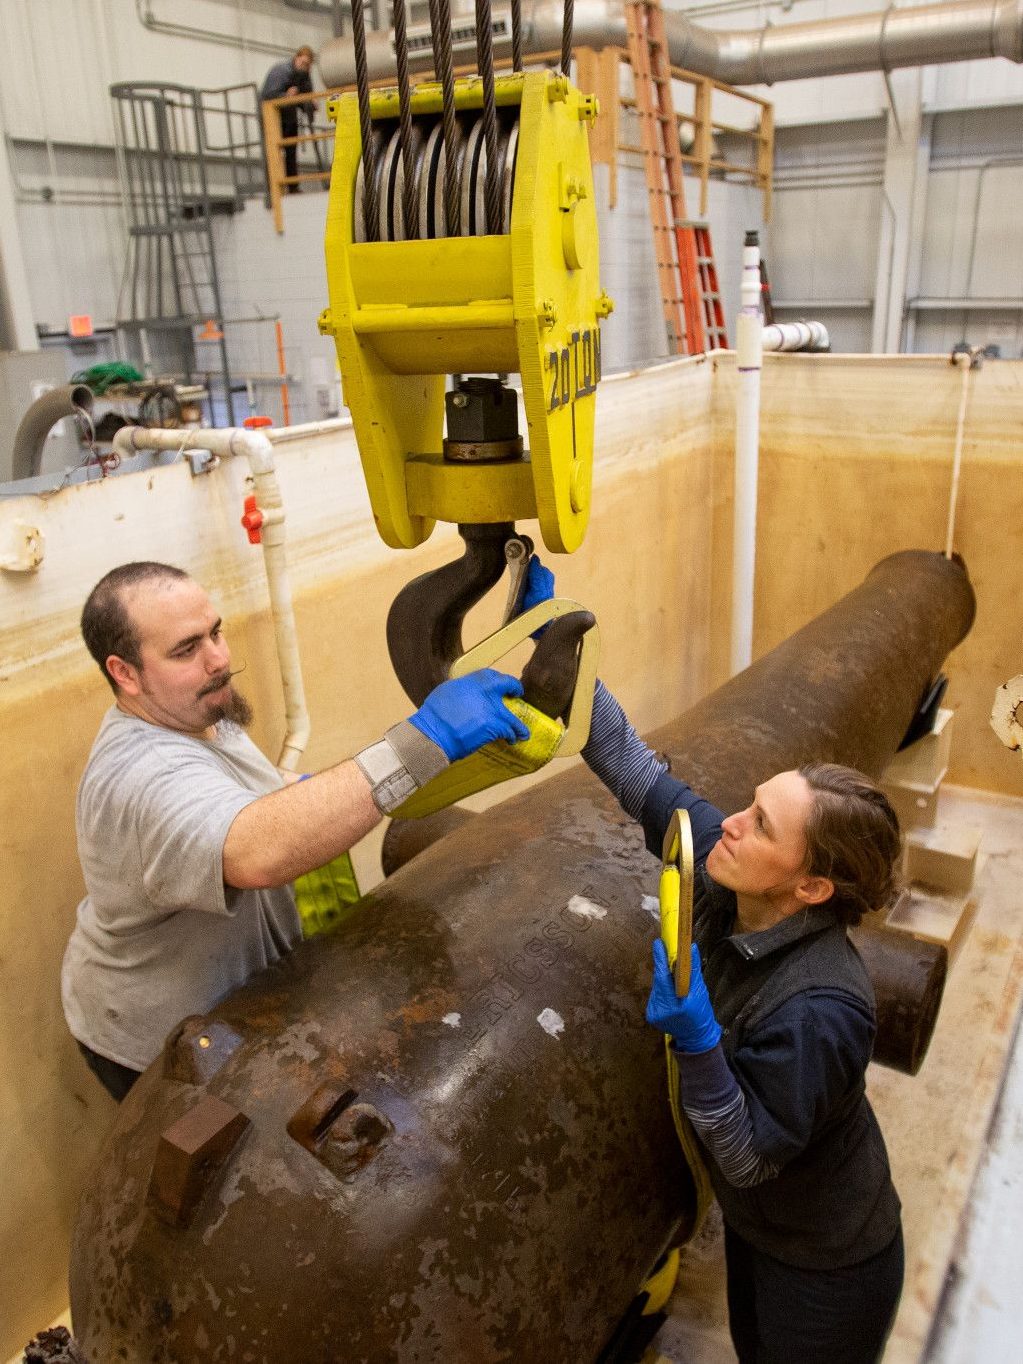 Conservators wrapping a belt around USS Monitor's Dahlgren gun to lift it out of its tank.